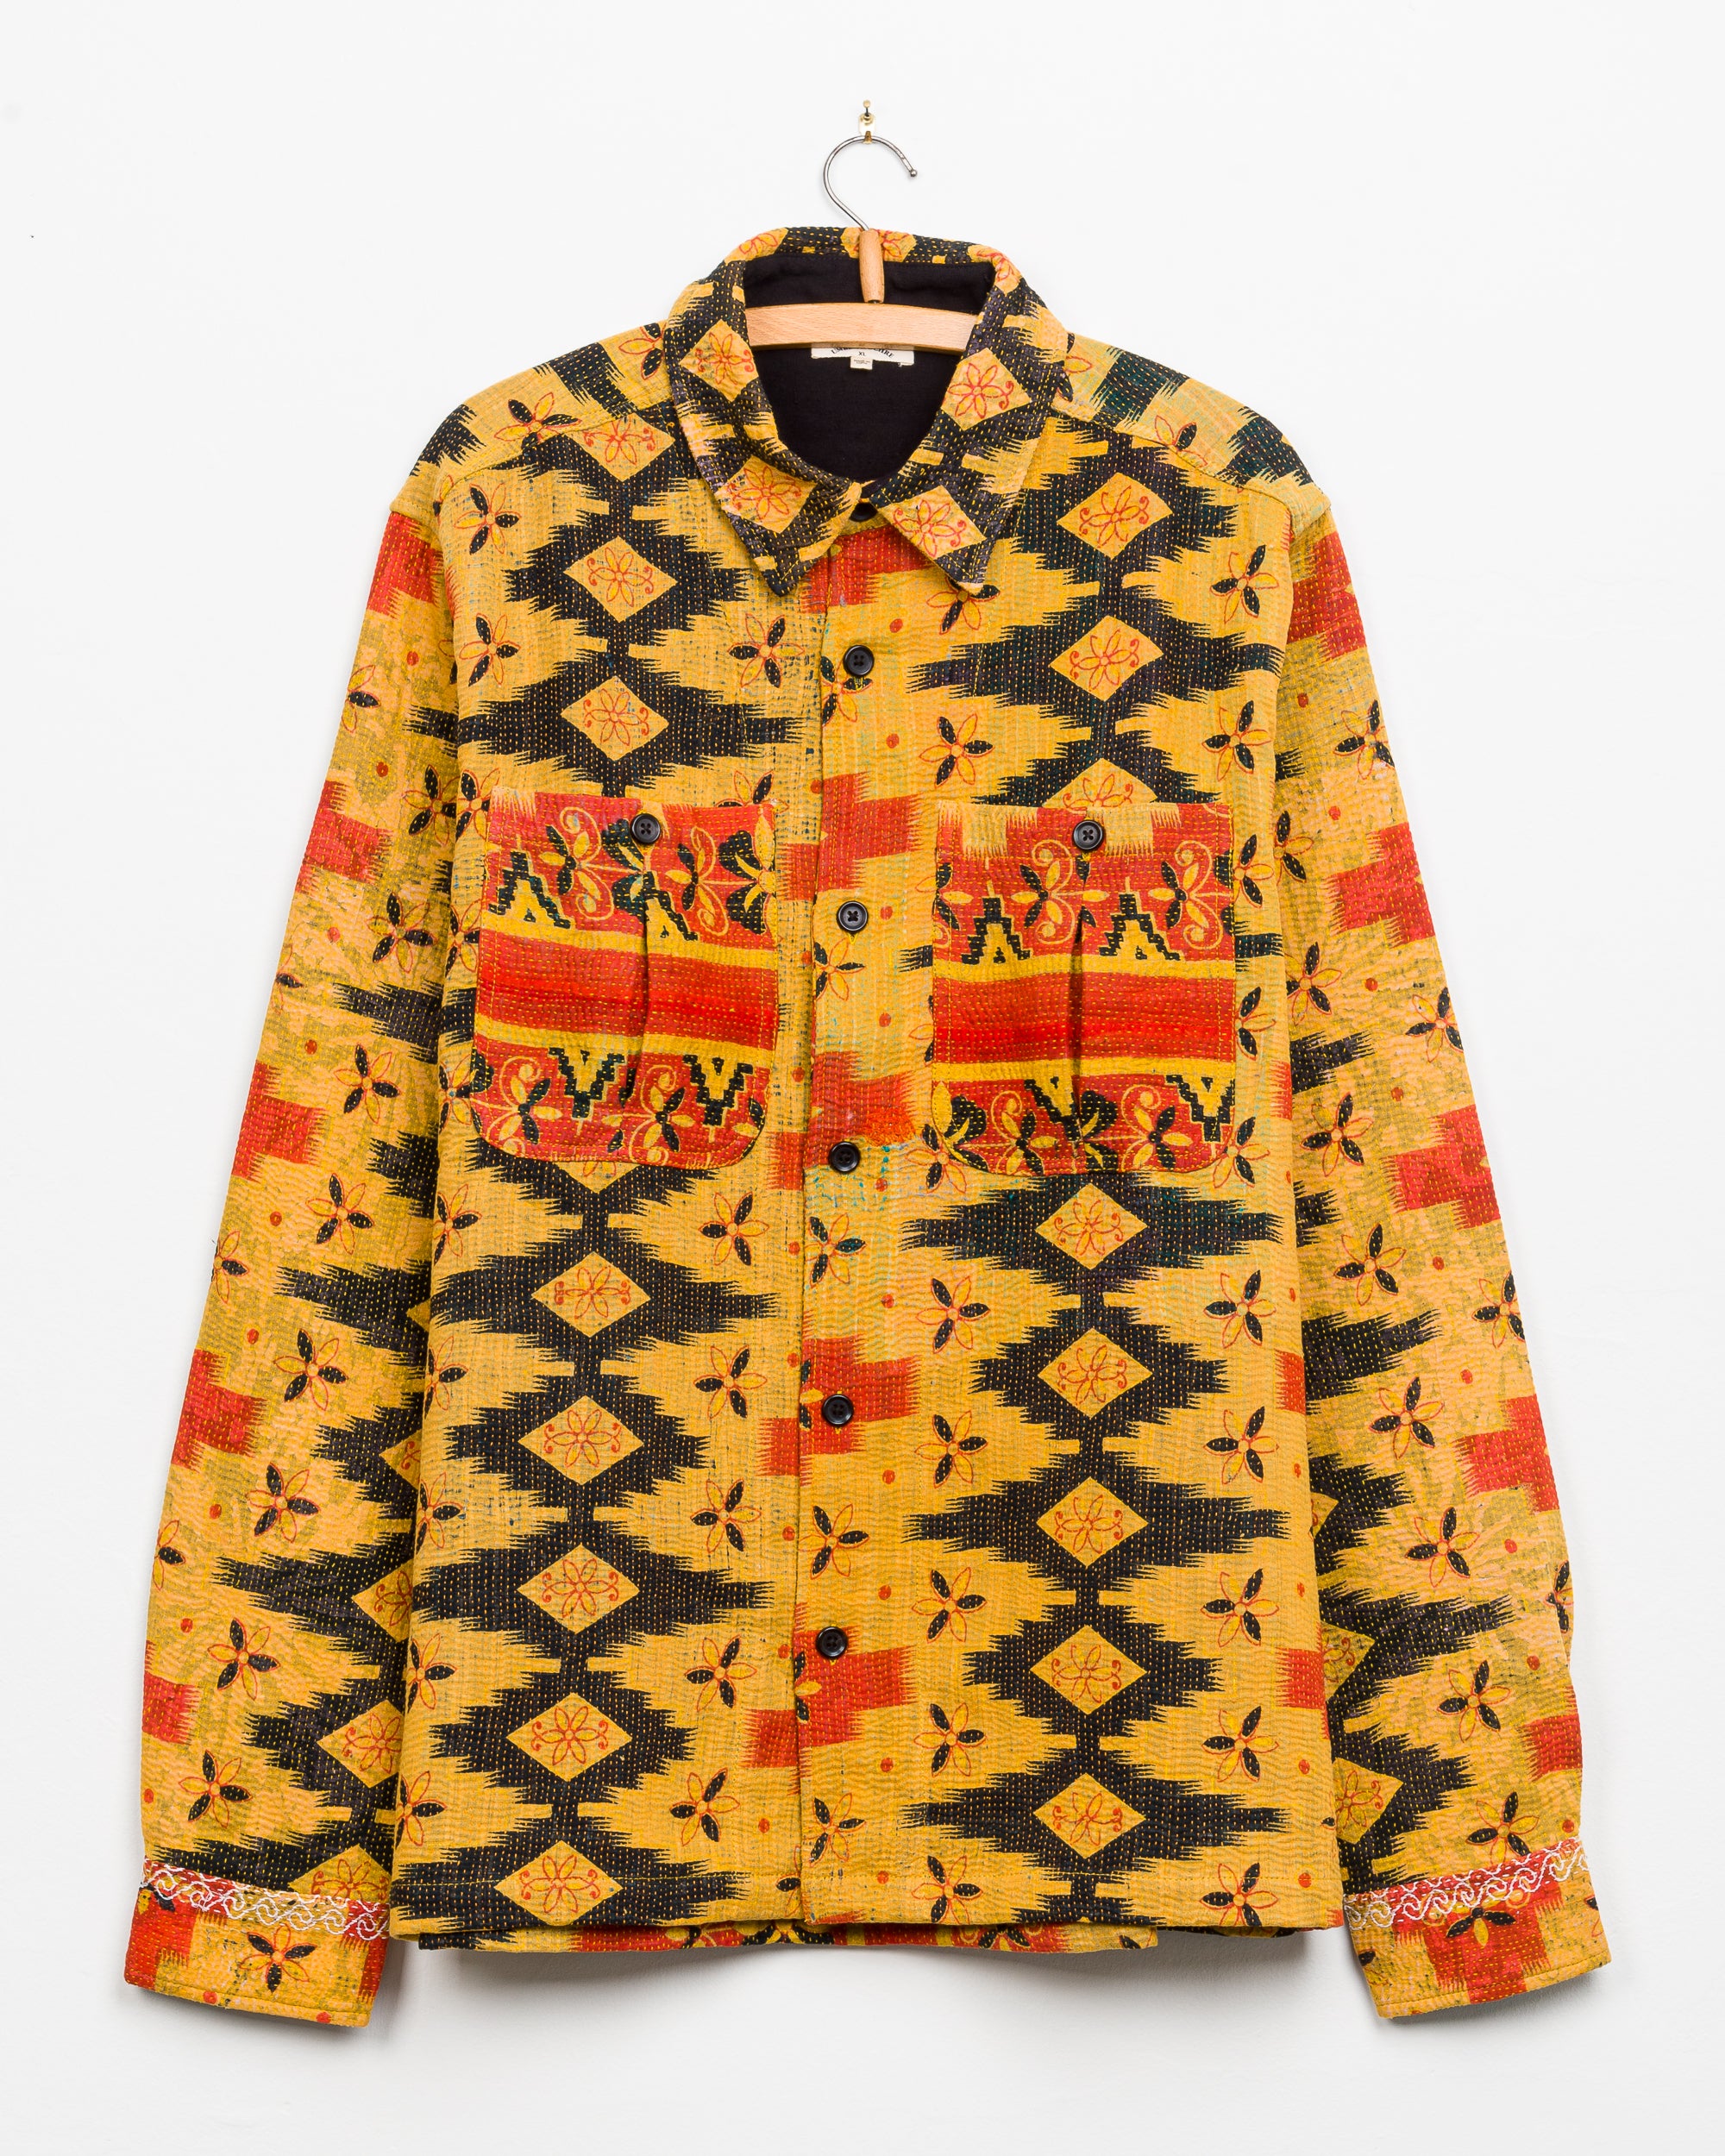 Vivek Overshirt in Quilted Kantha - XL